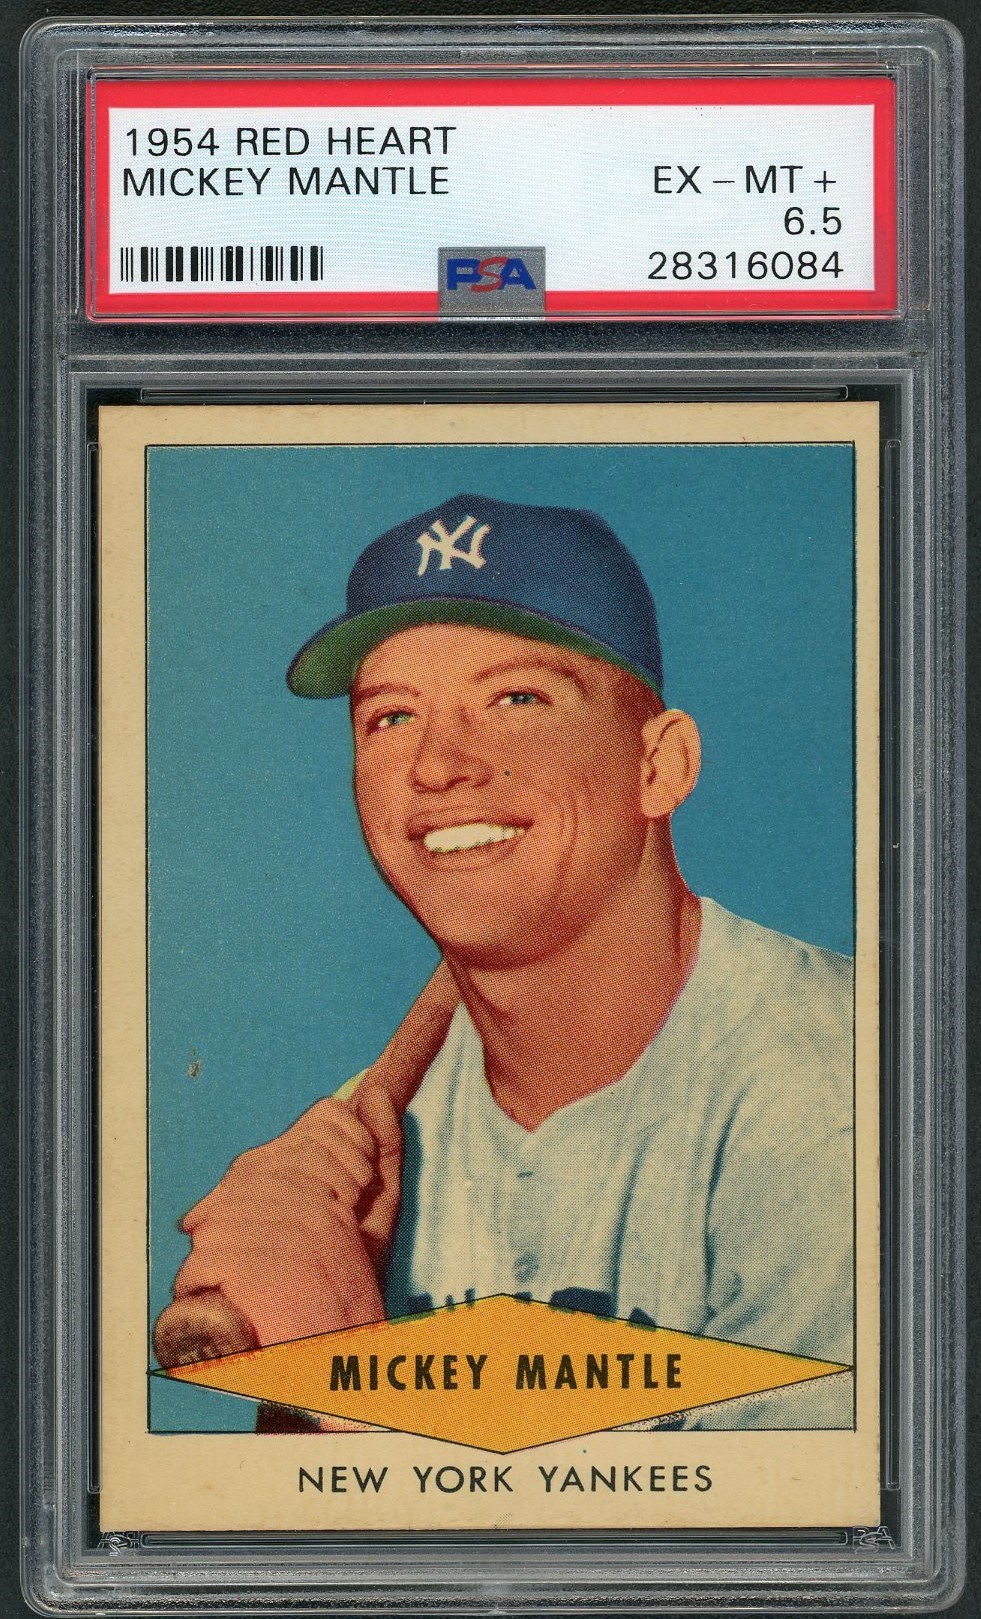 1954 Red Heart Mickey Mantle - PSA EX-MT+ 6.5